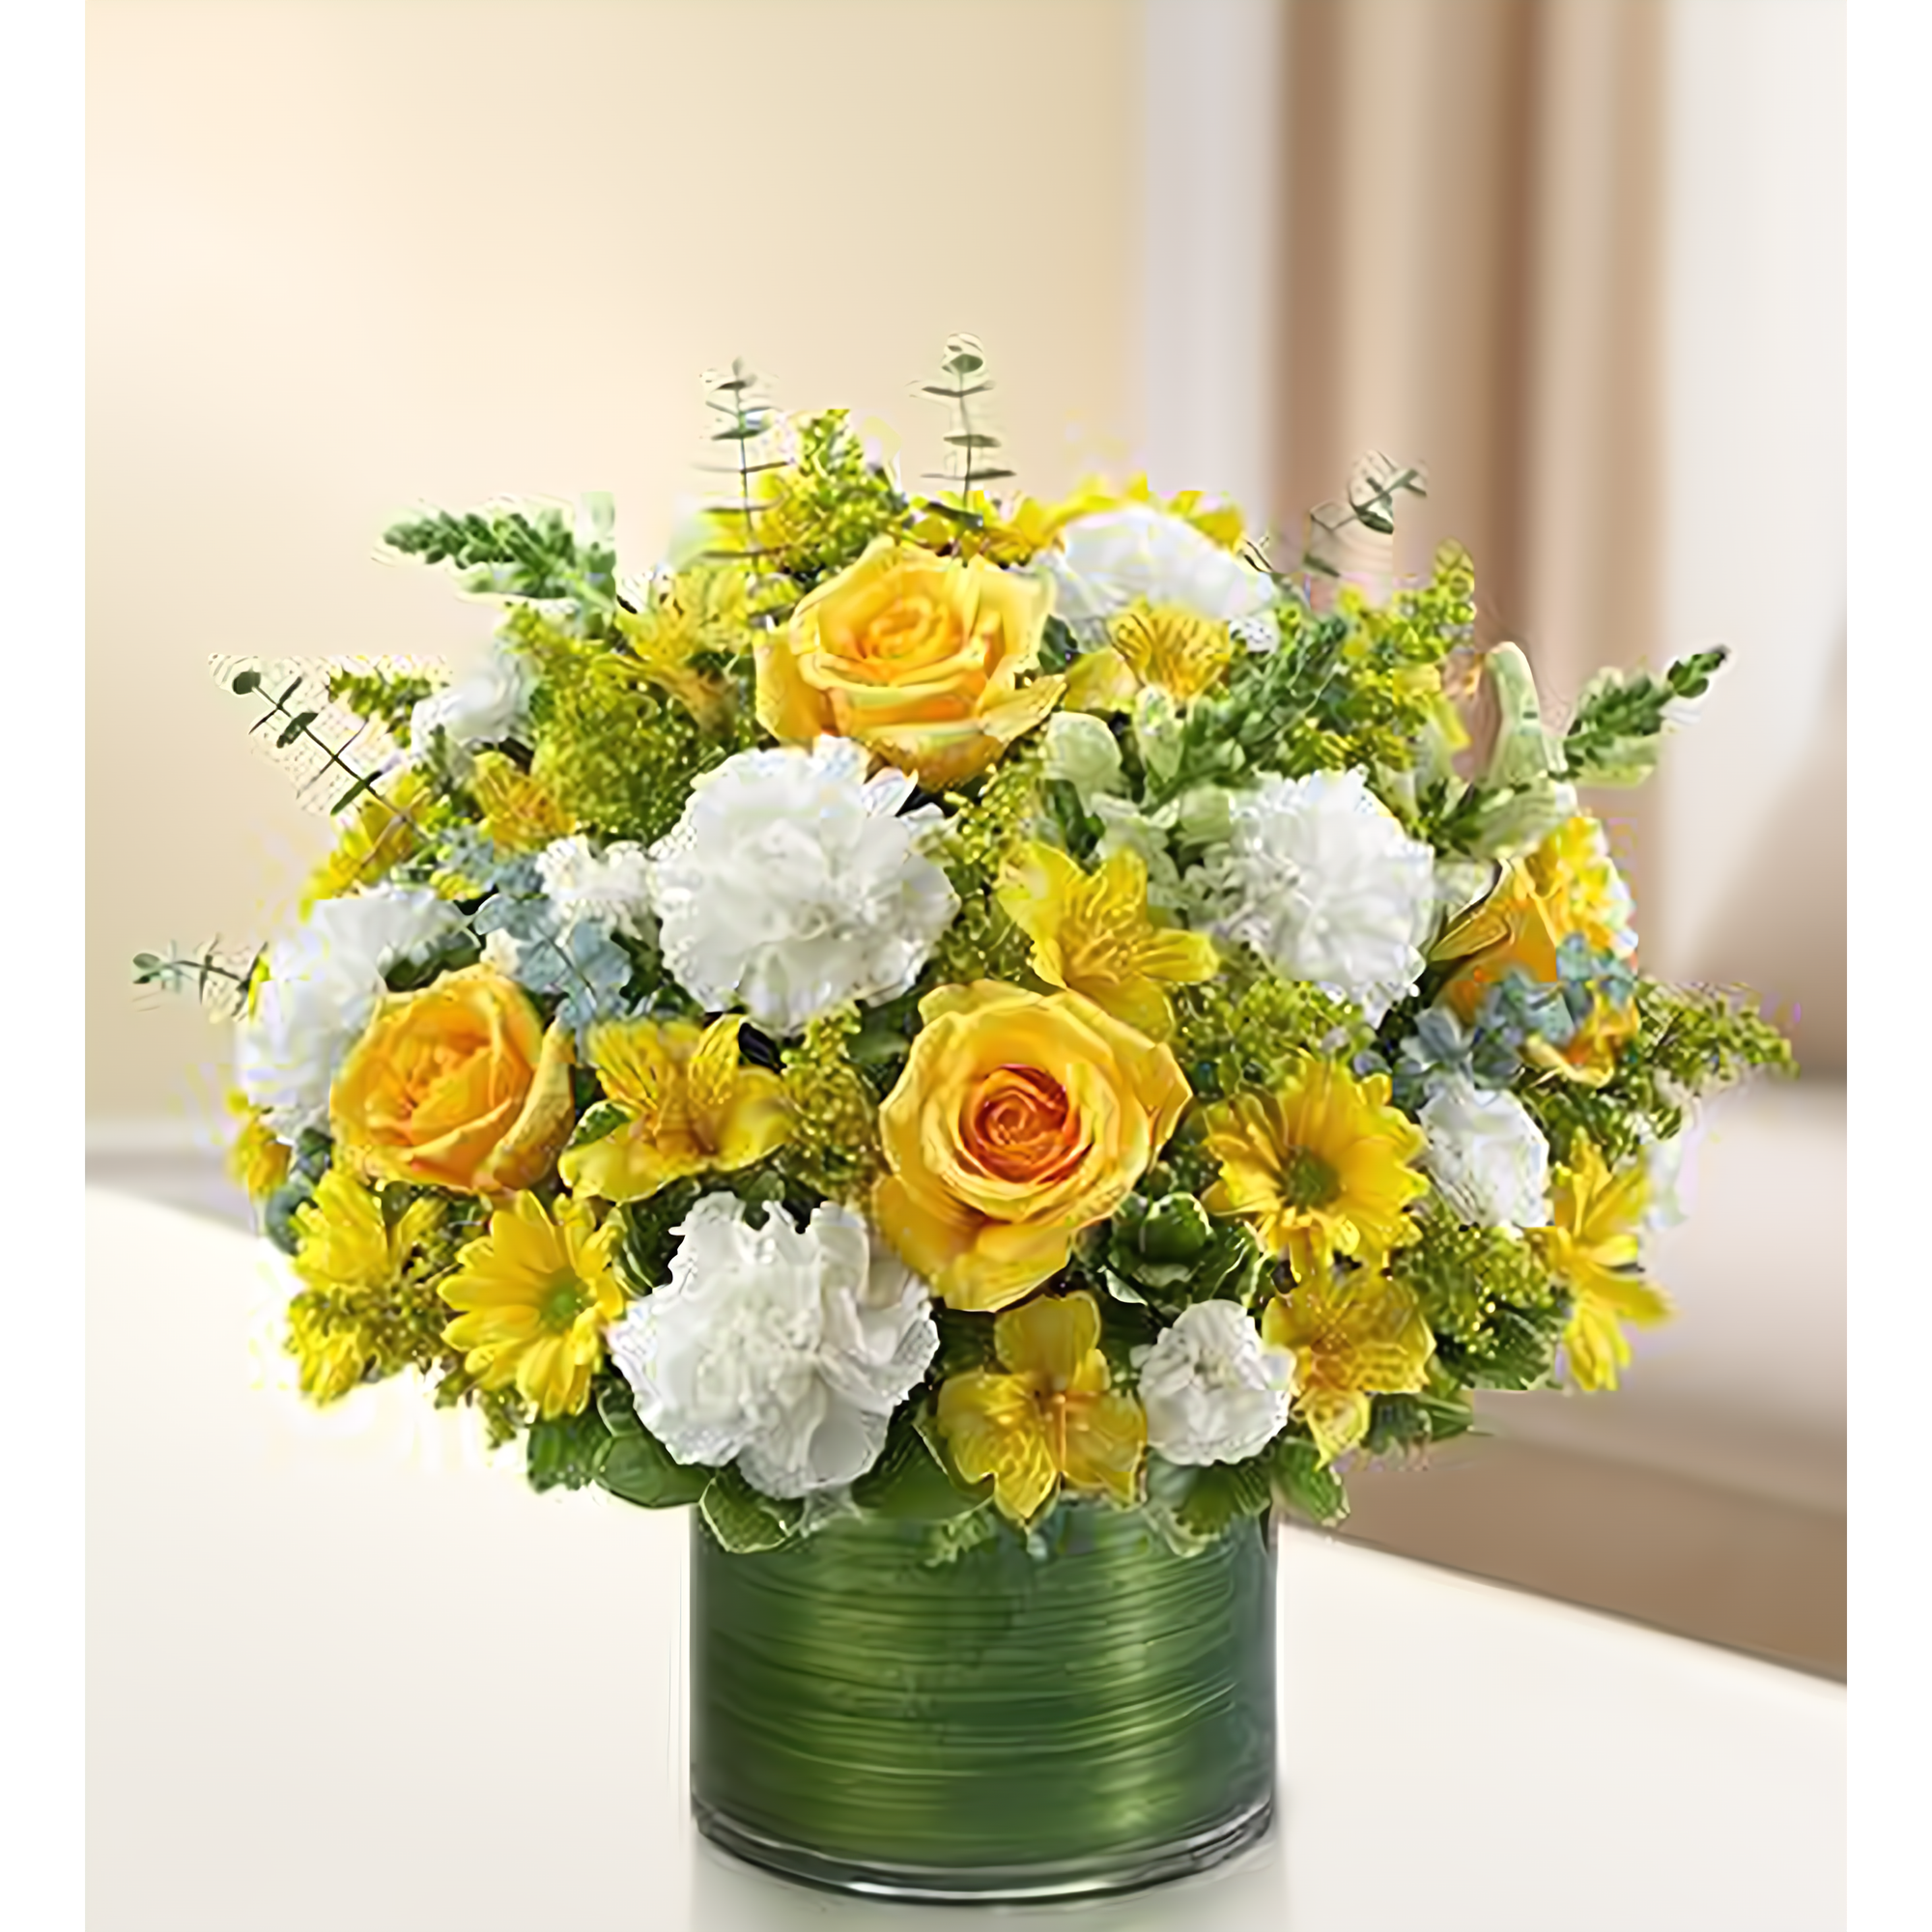 Manhattan Flower Delivery - Cherished Memories - Yellow and White - Funeral > Vase Arrangements